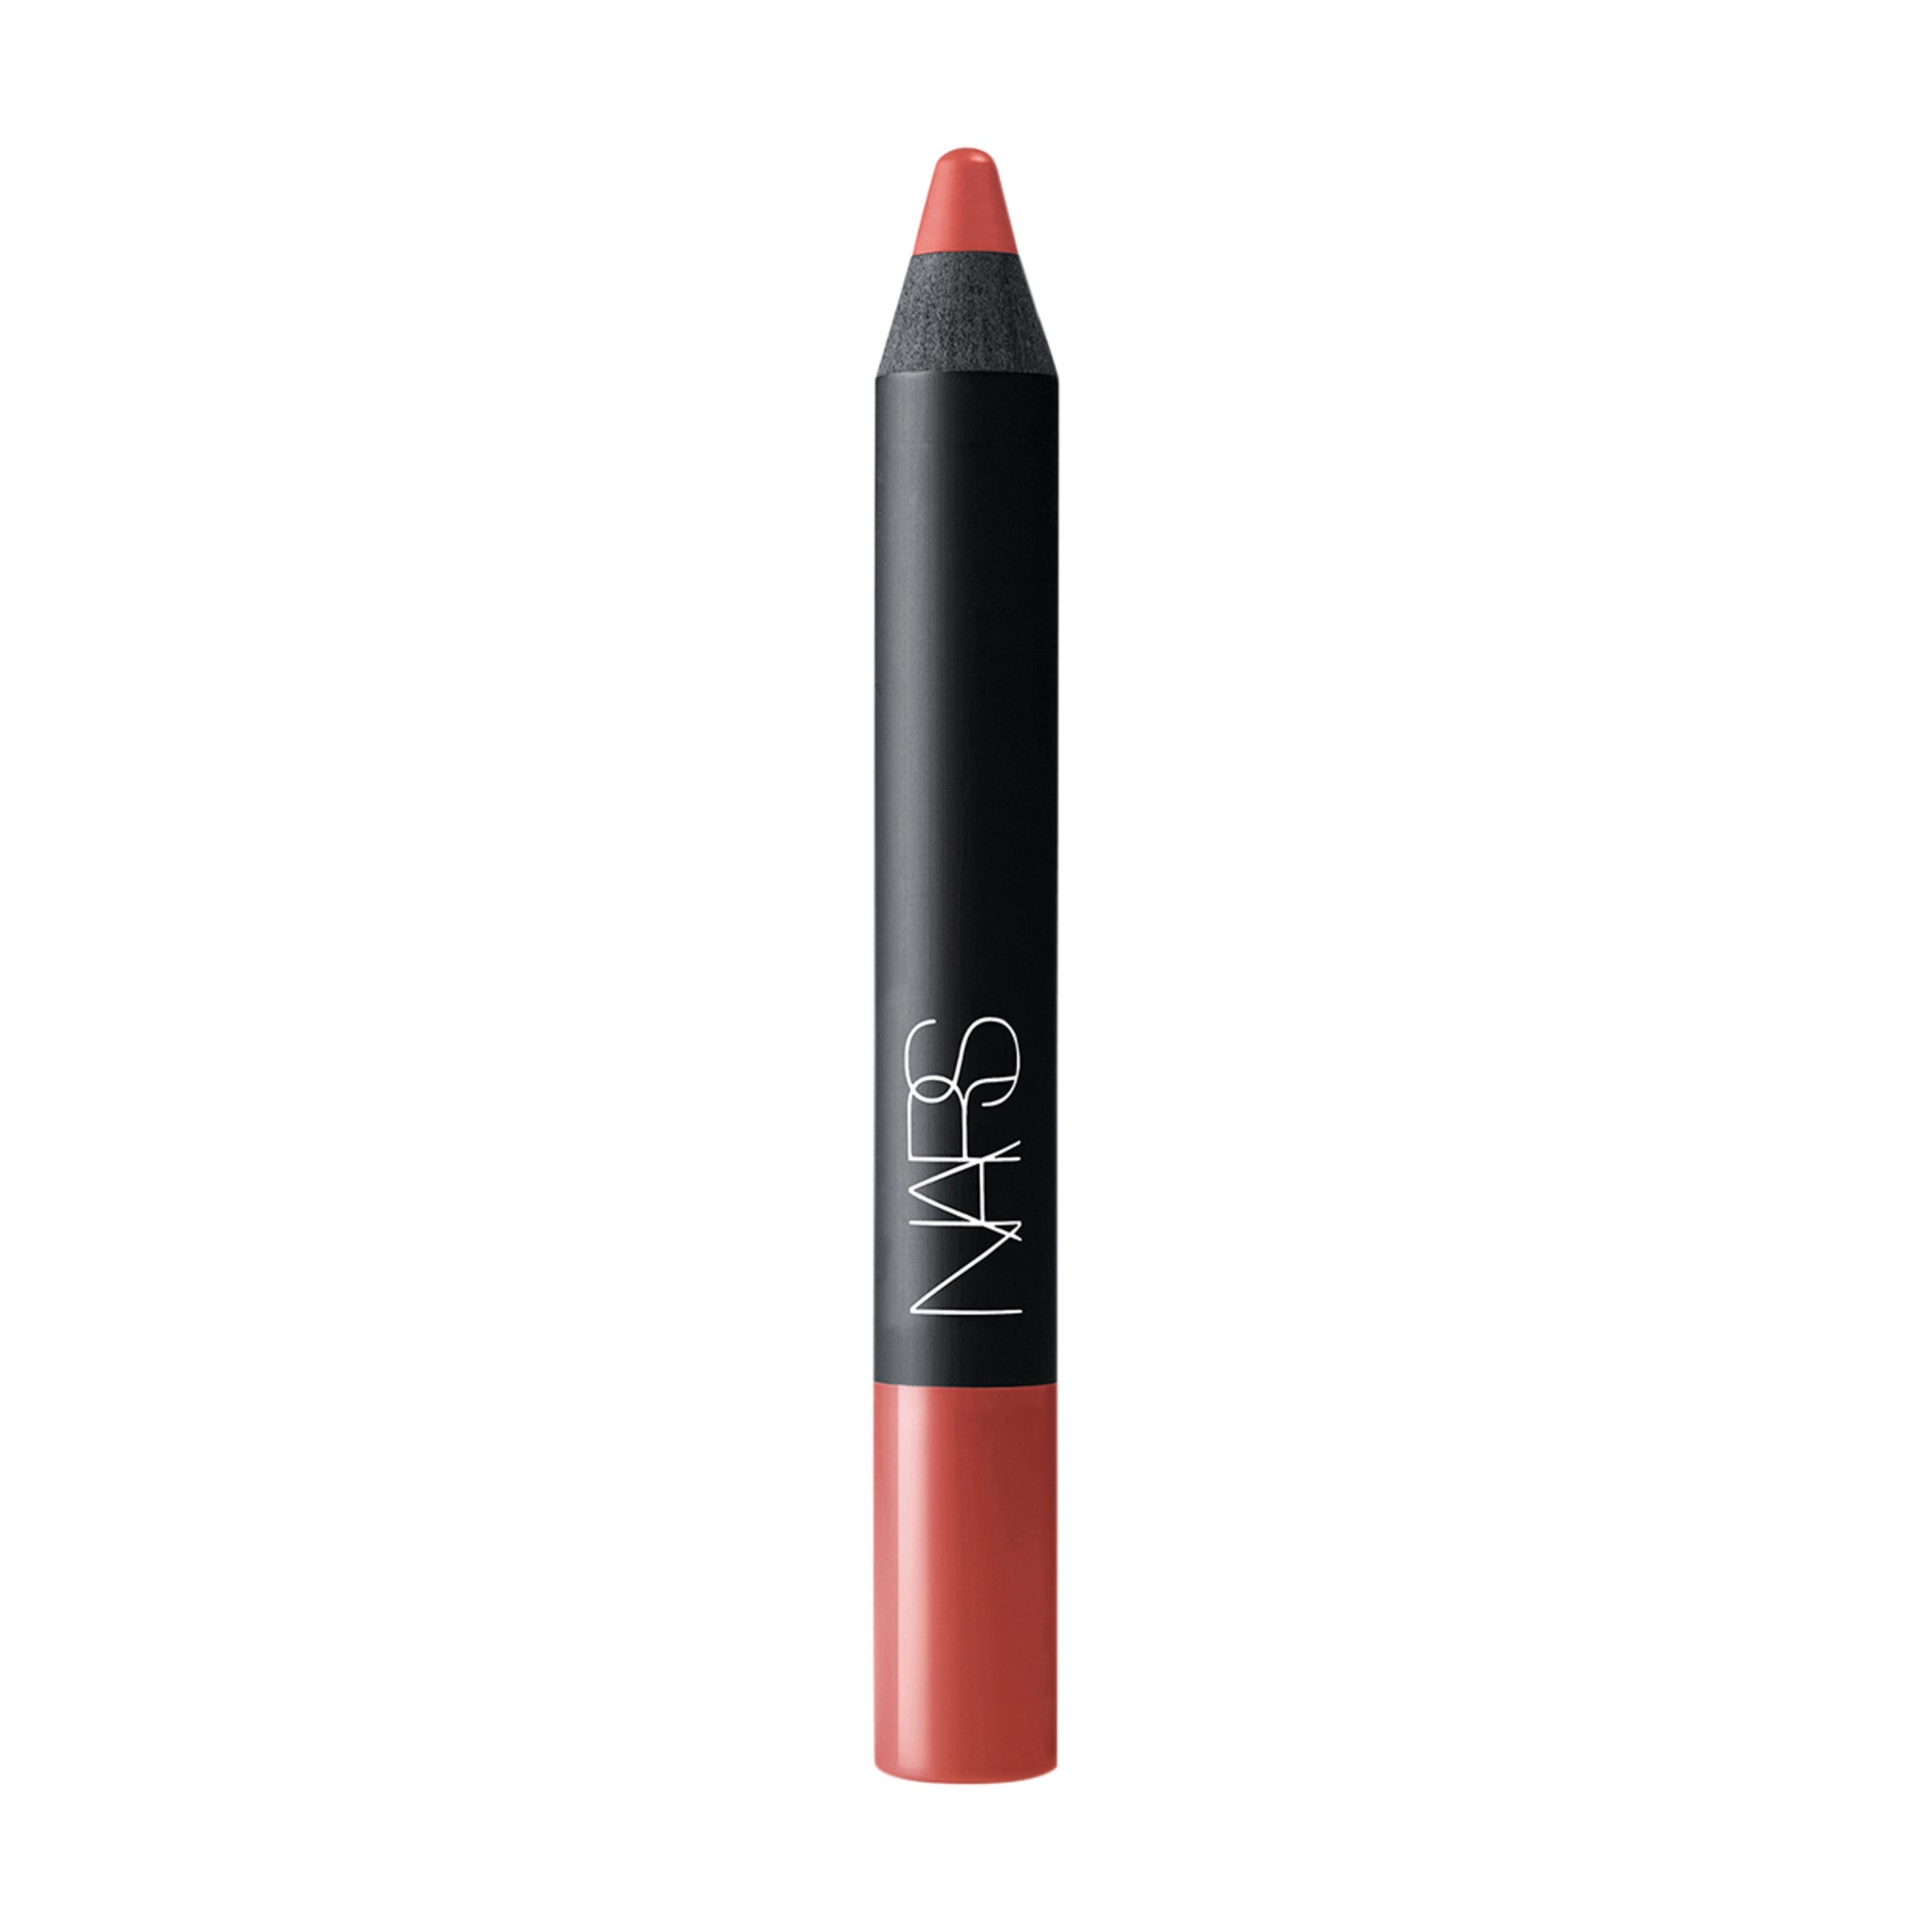 Nars Velvet Matte Lip Pencil Color/Shade variant: Take Me Home main image. This product is in the color coral